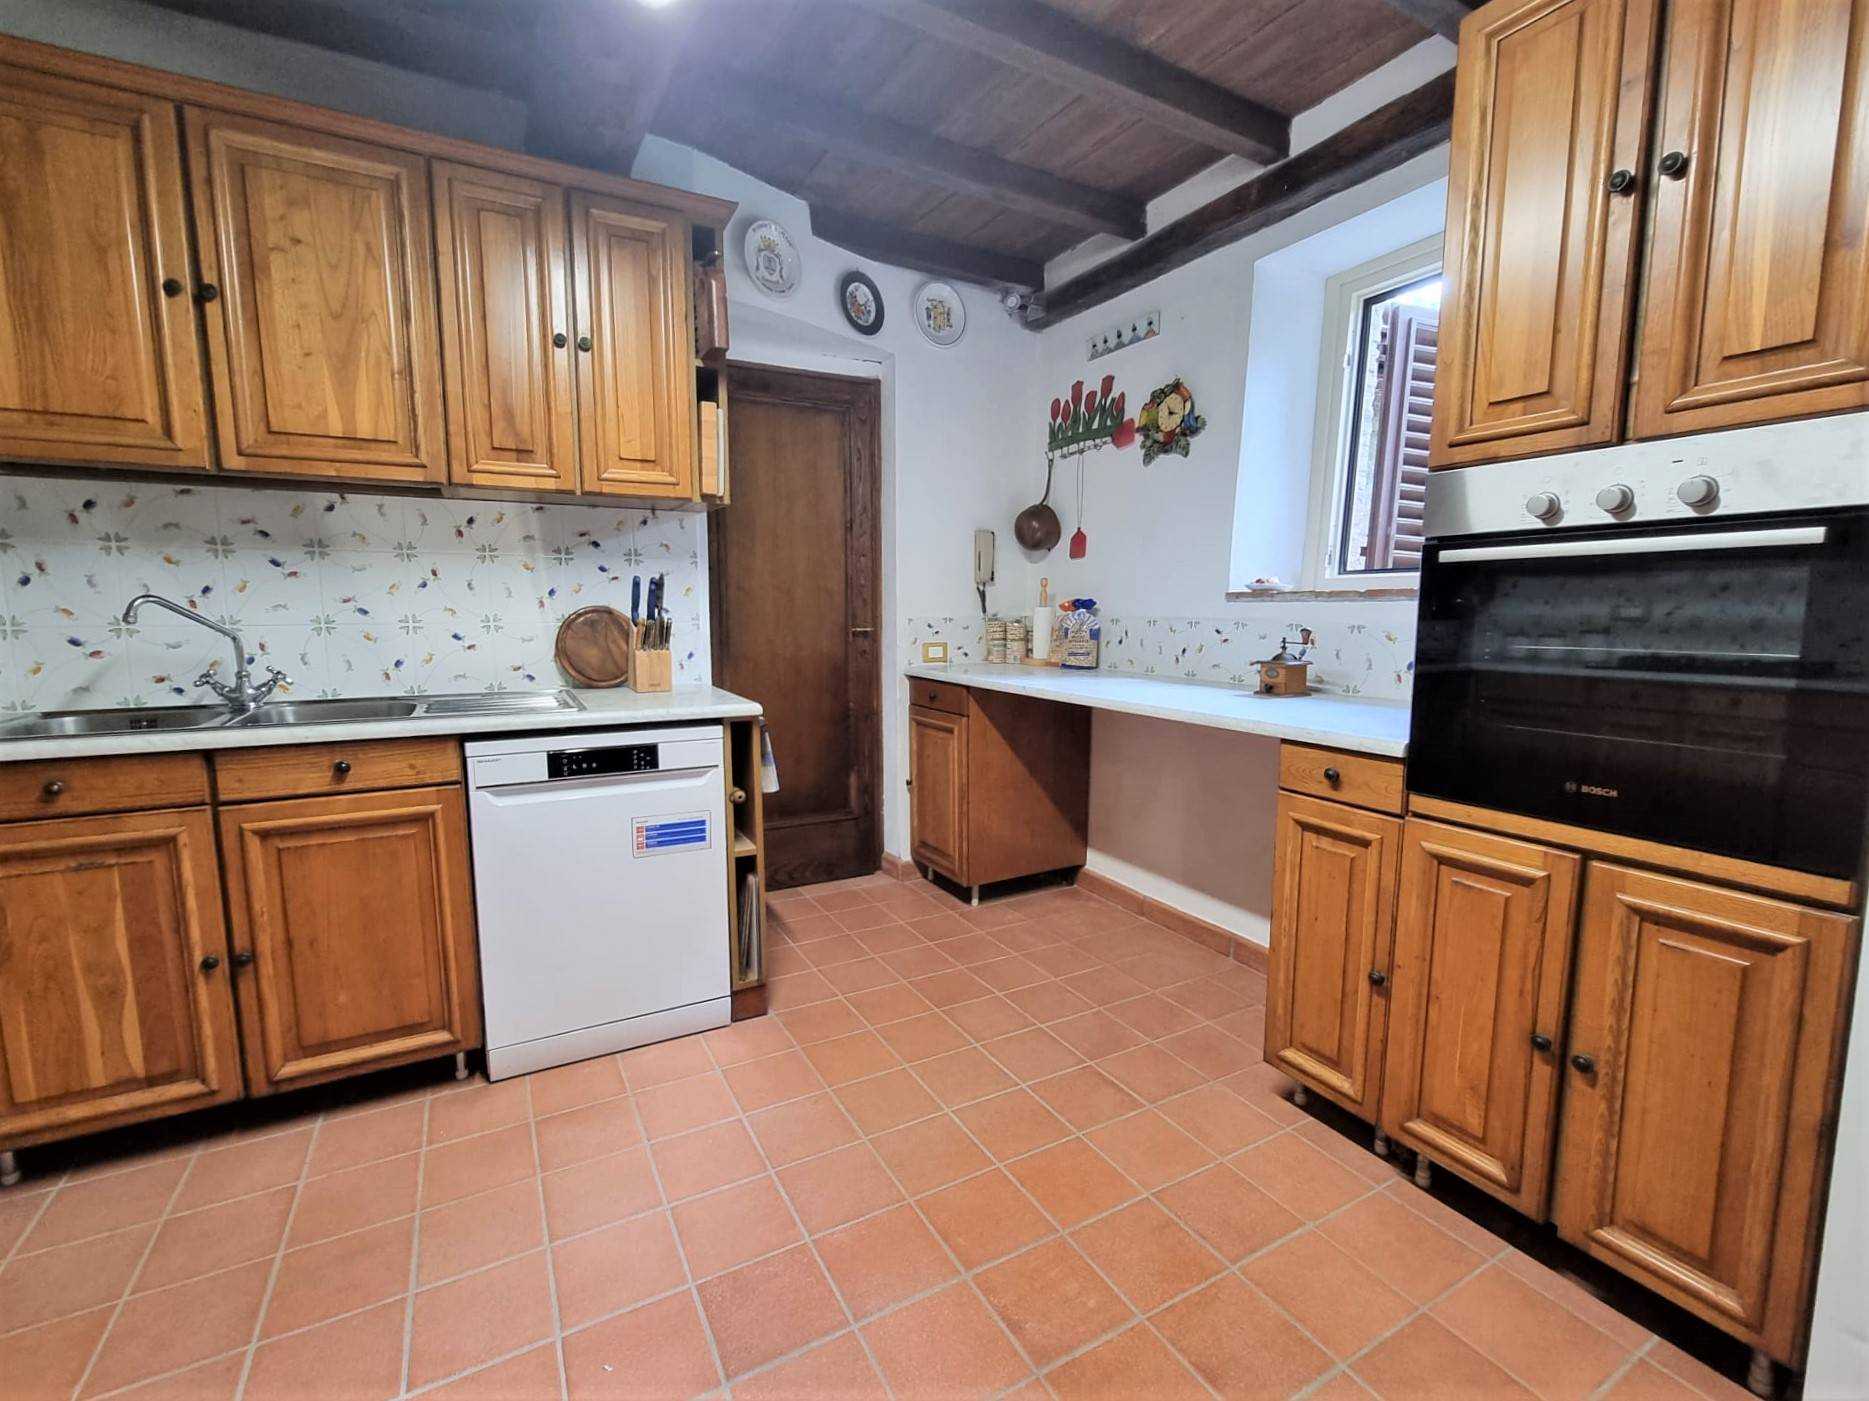 loger dans Torcigliano, Toscana 11877854